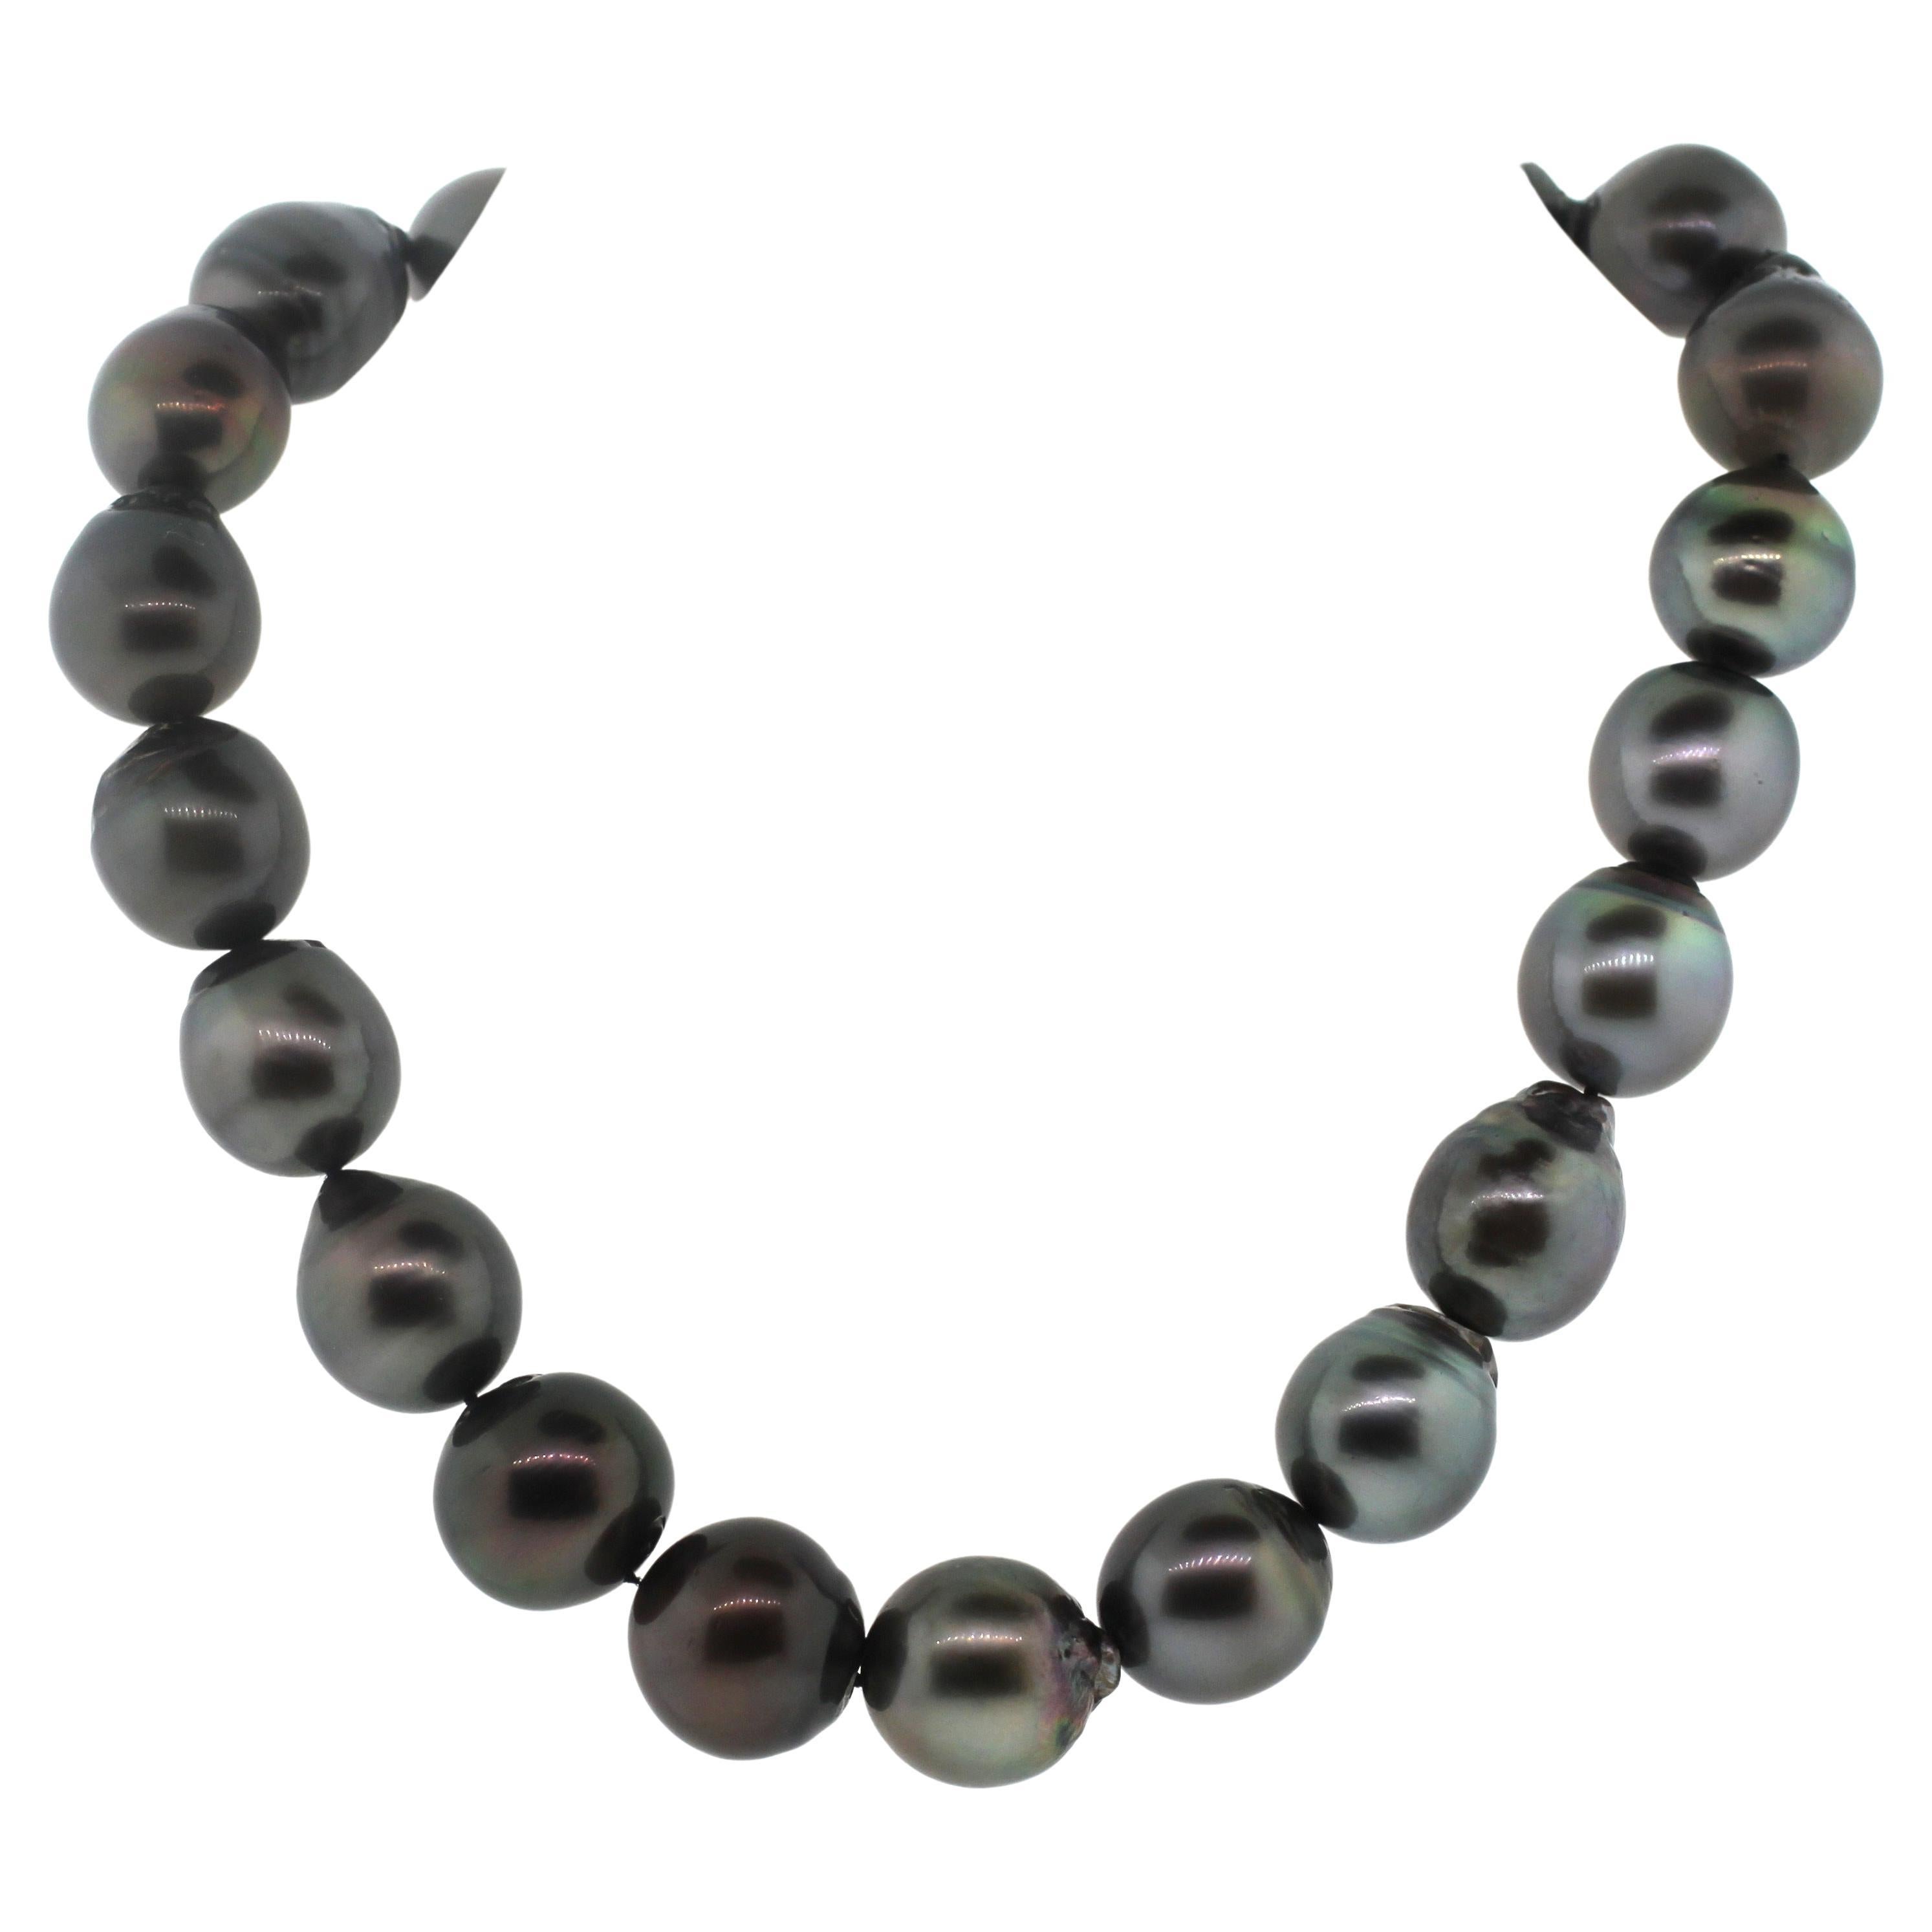 Hakimoto By Jewel Of Ocean 18K Tahitian South Sea Strand Necklace
18K White Gold With Diamonds 
Weight (g): 132.7
Cultured Tahitian South Sea Baroque Pearl 
Pearl Size: 17X15mm 
Pearl Shape: Baroque
Body color: Gray
Orient: Very Good
Luster: Very